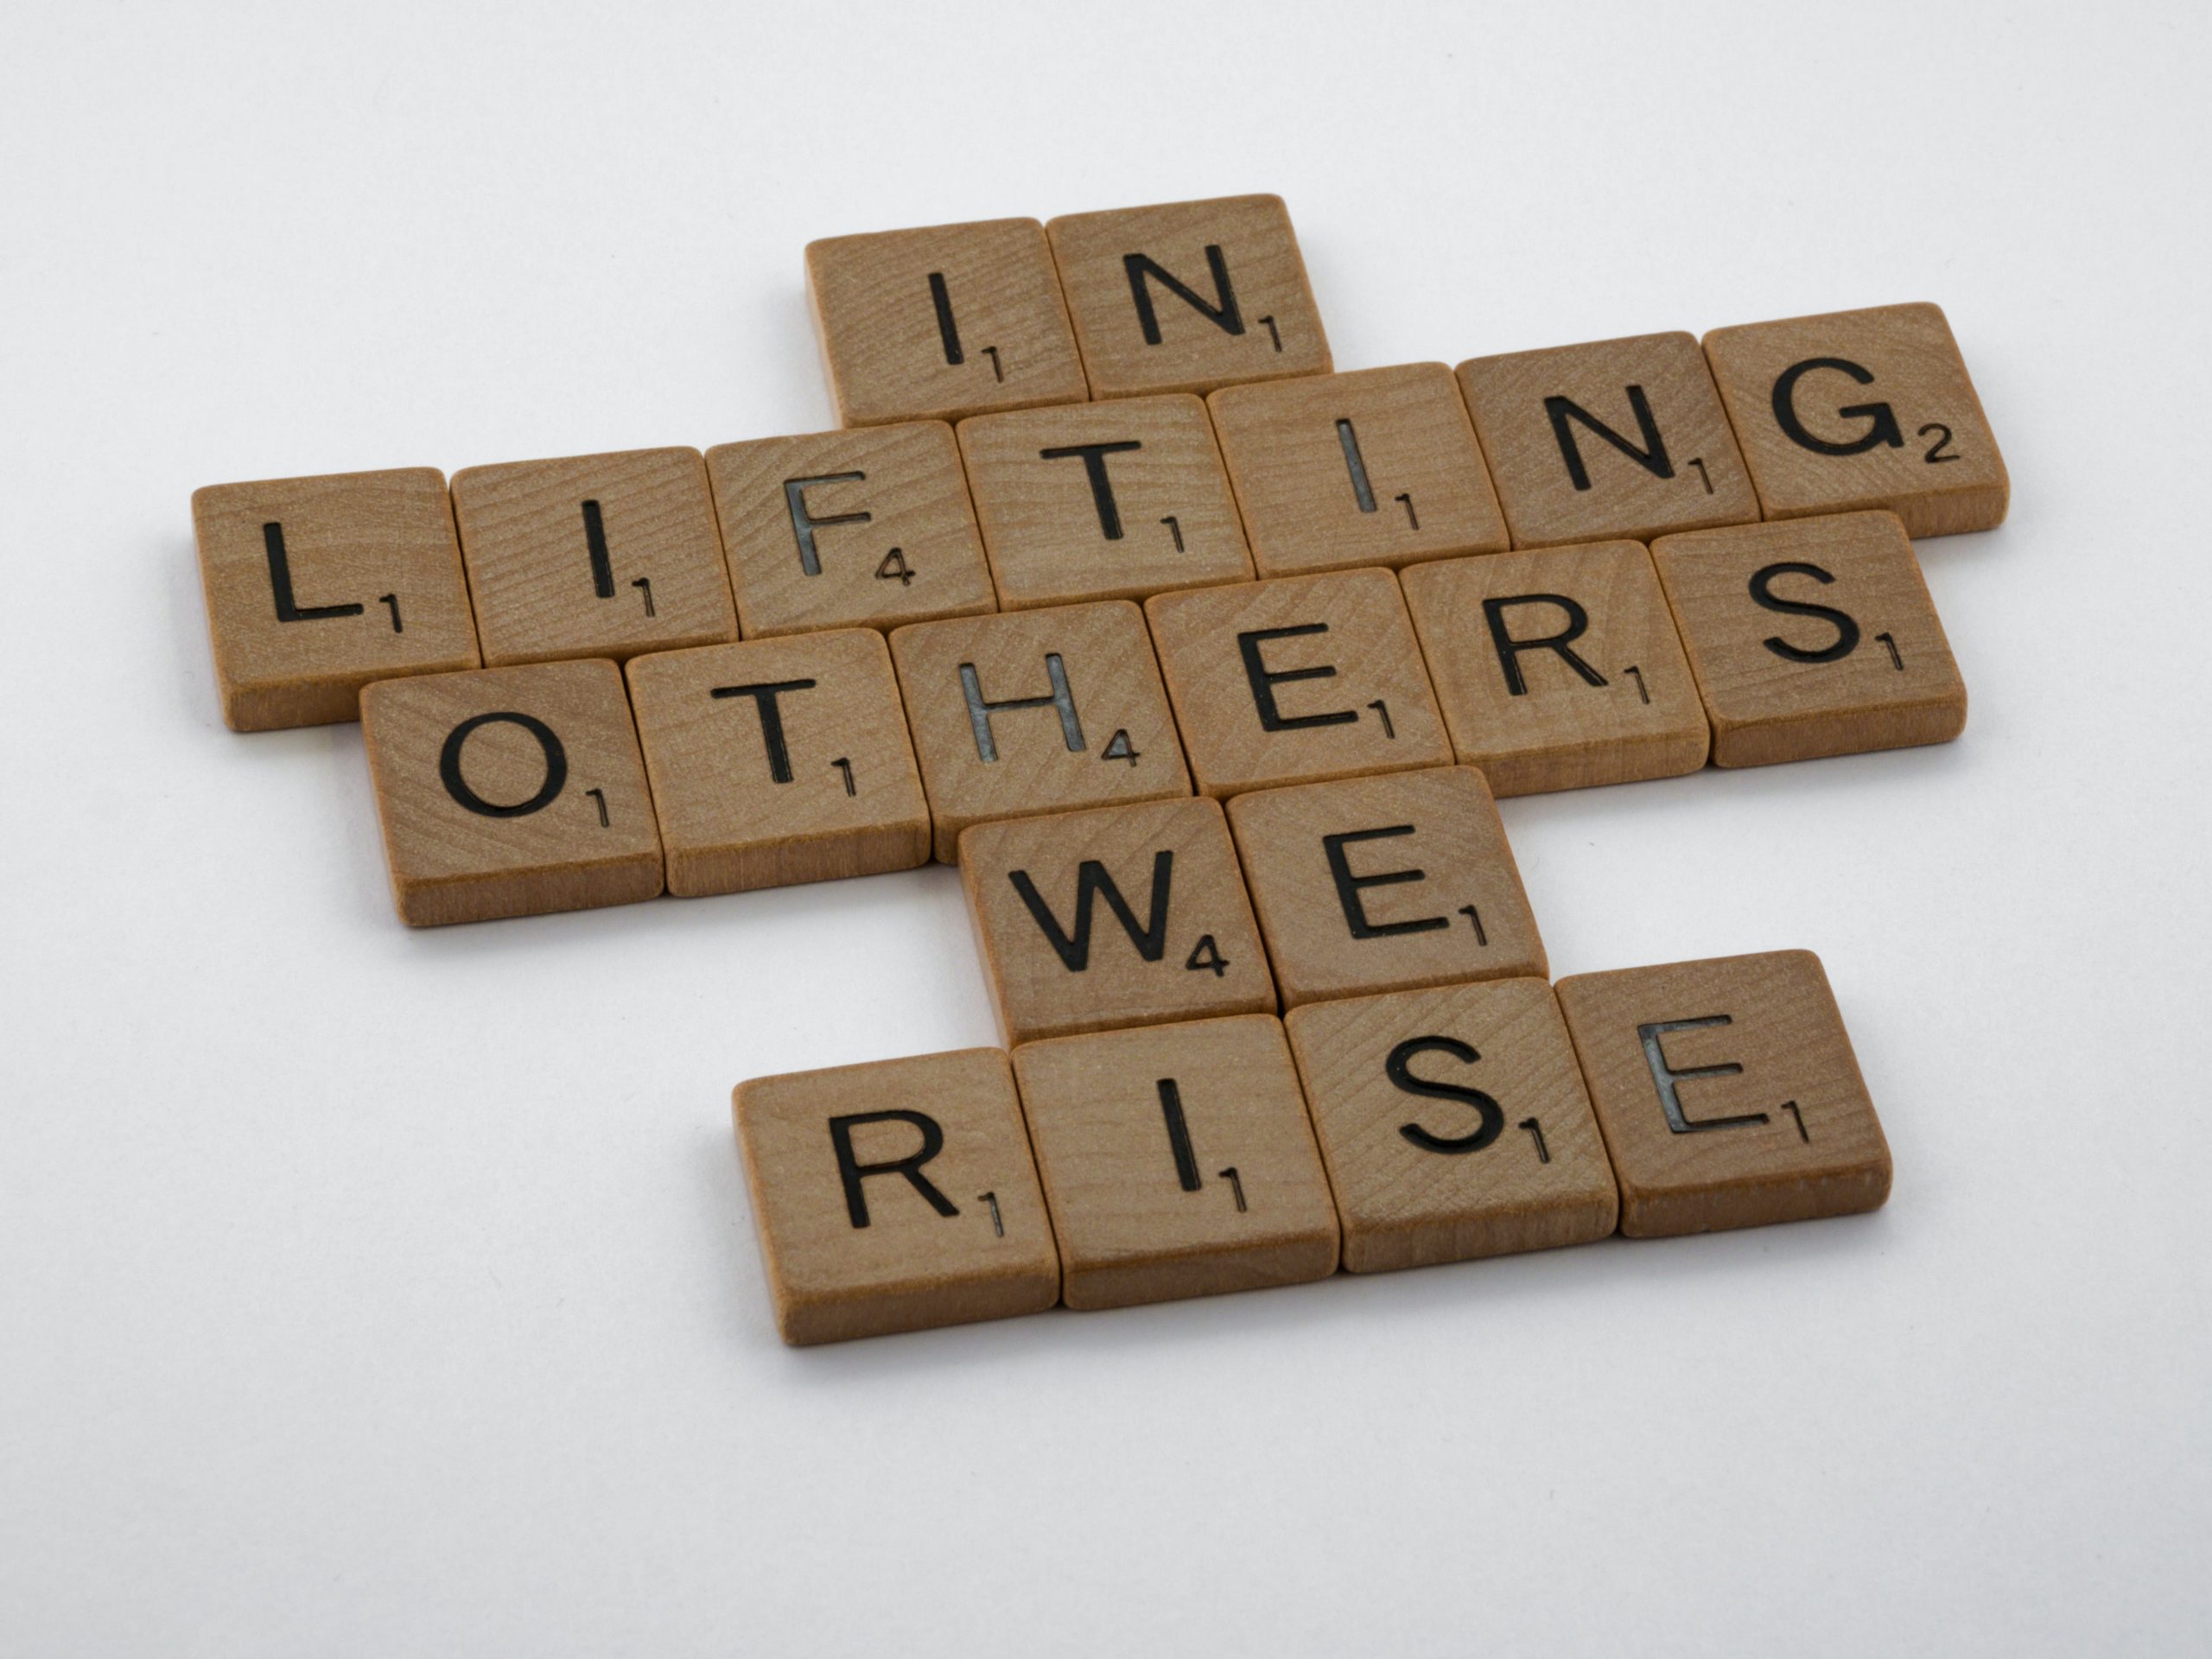 In lifting others, we rise